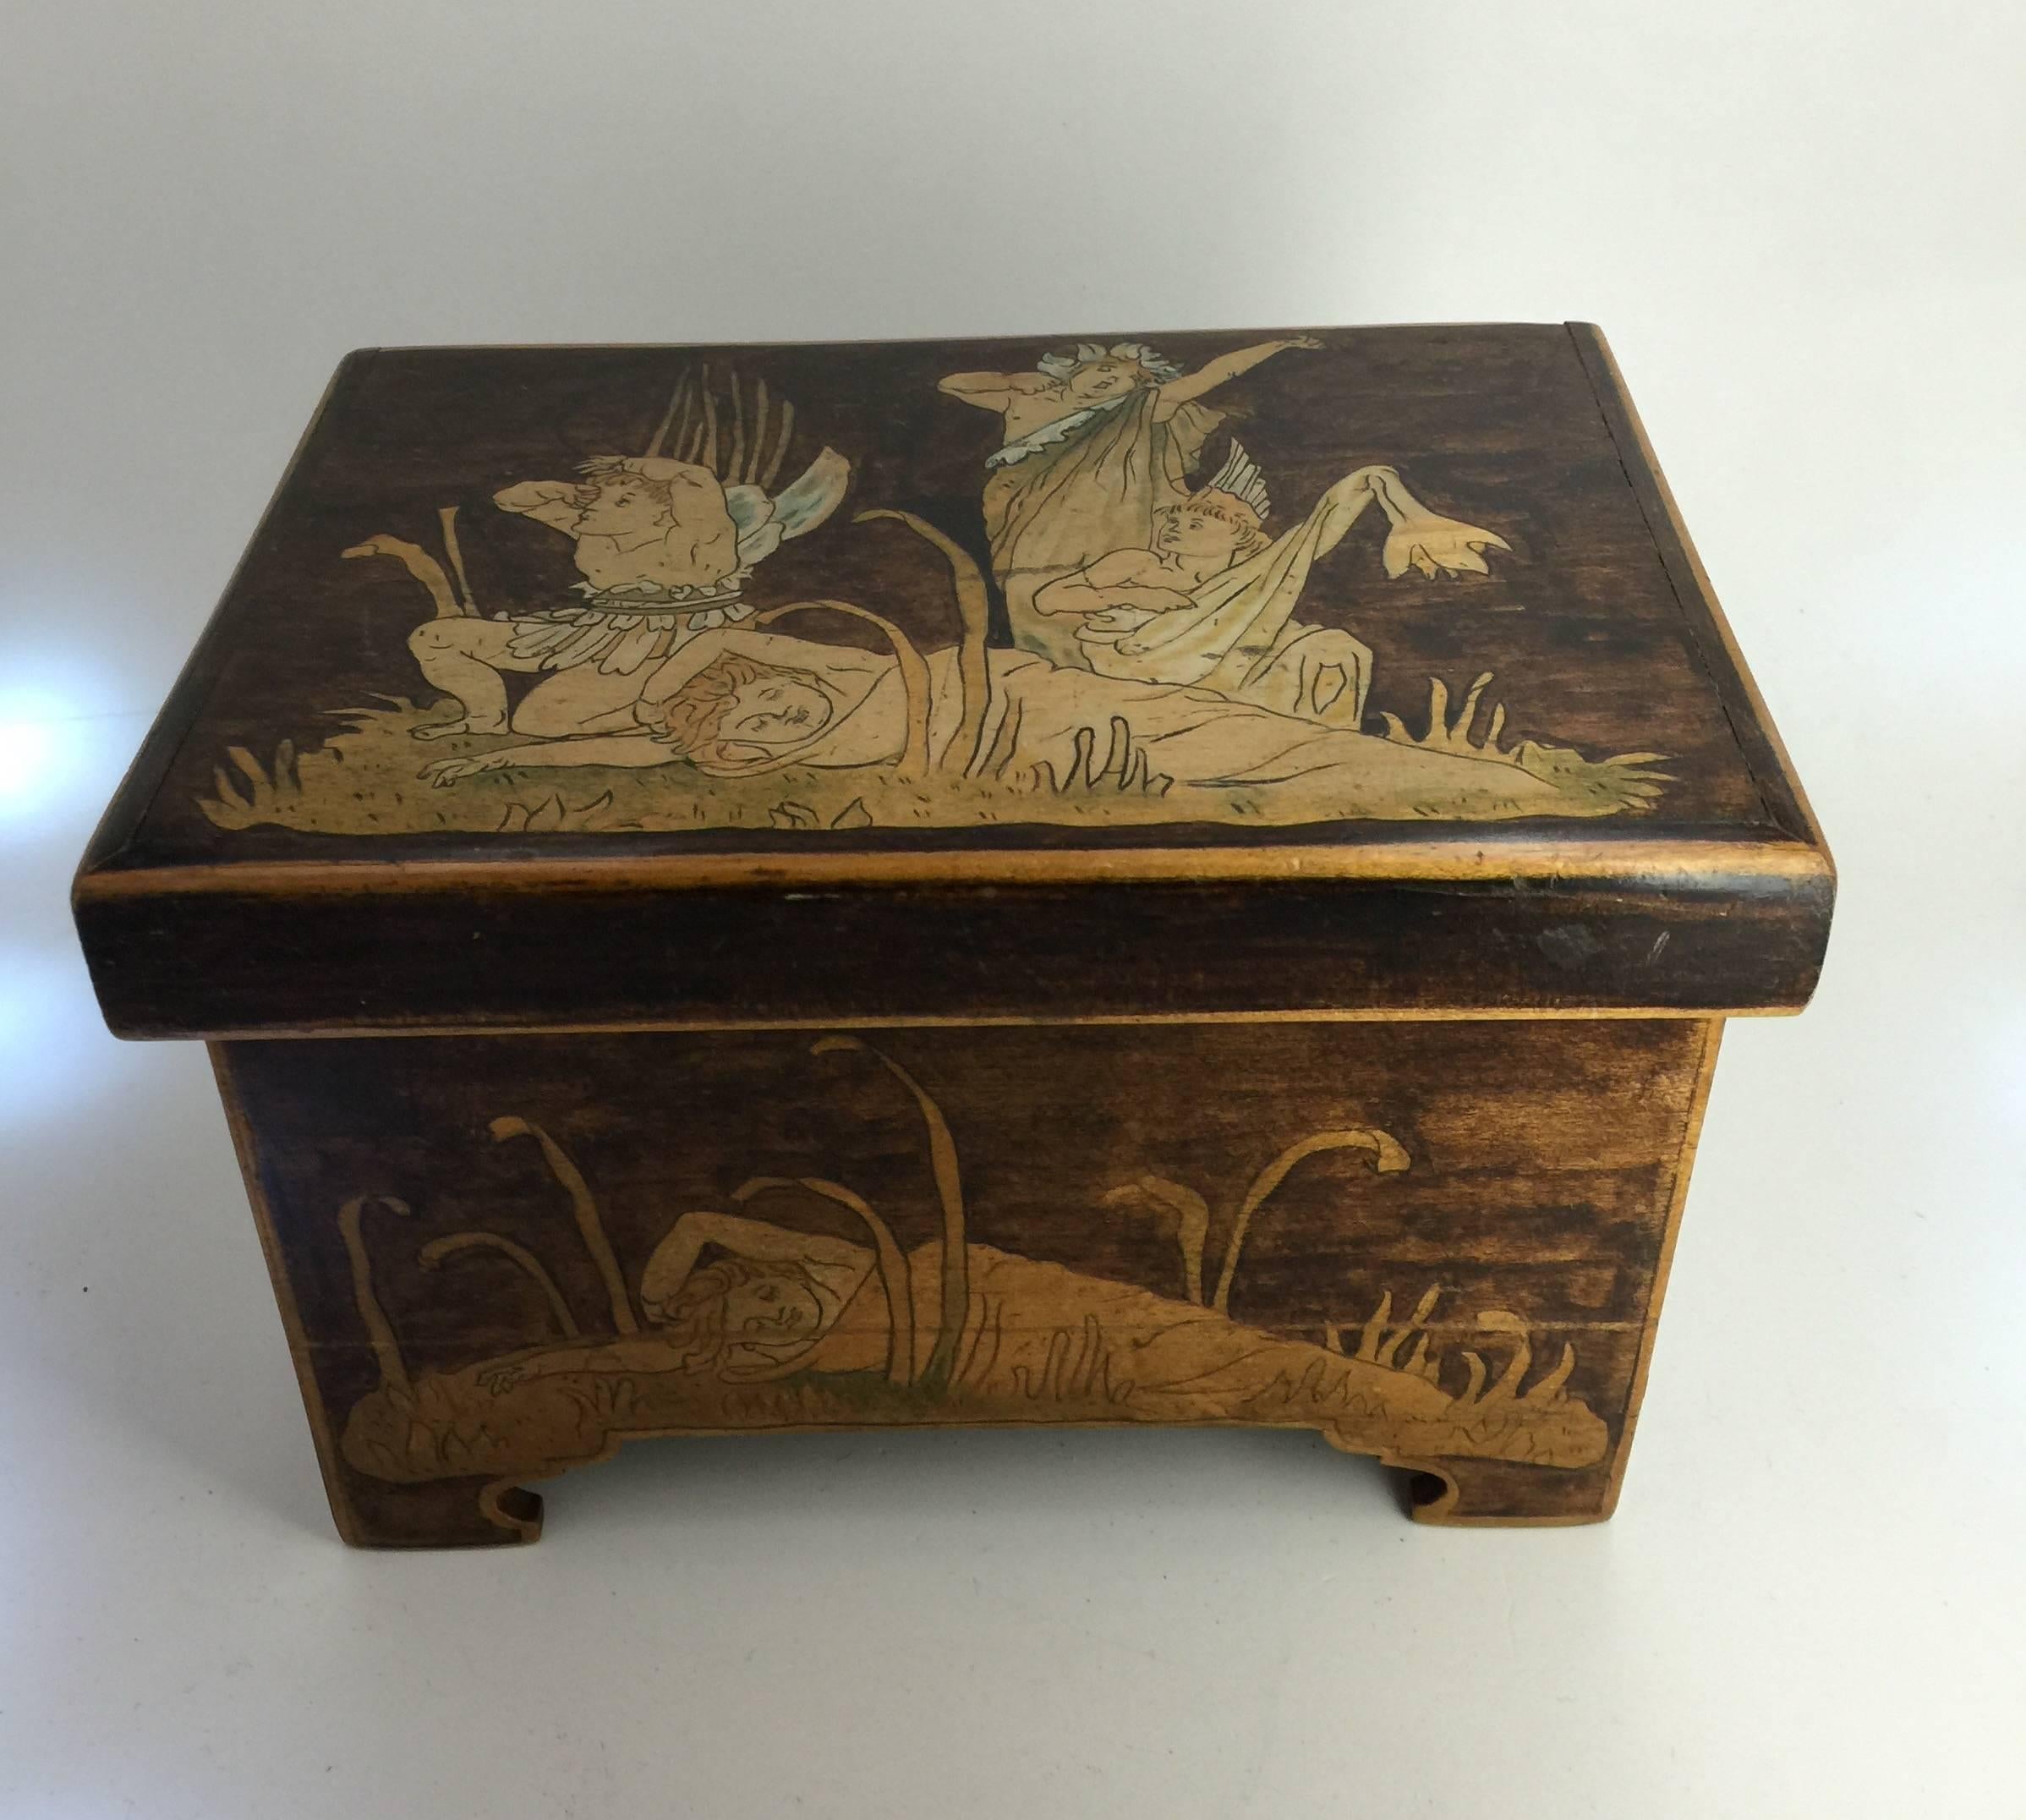 The box with scenes of lilliputian figures